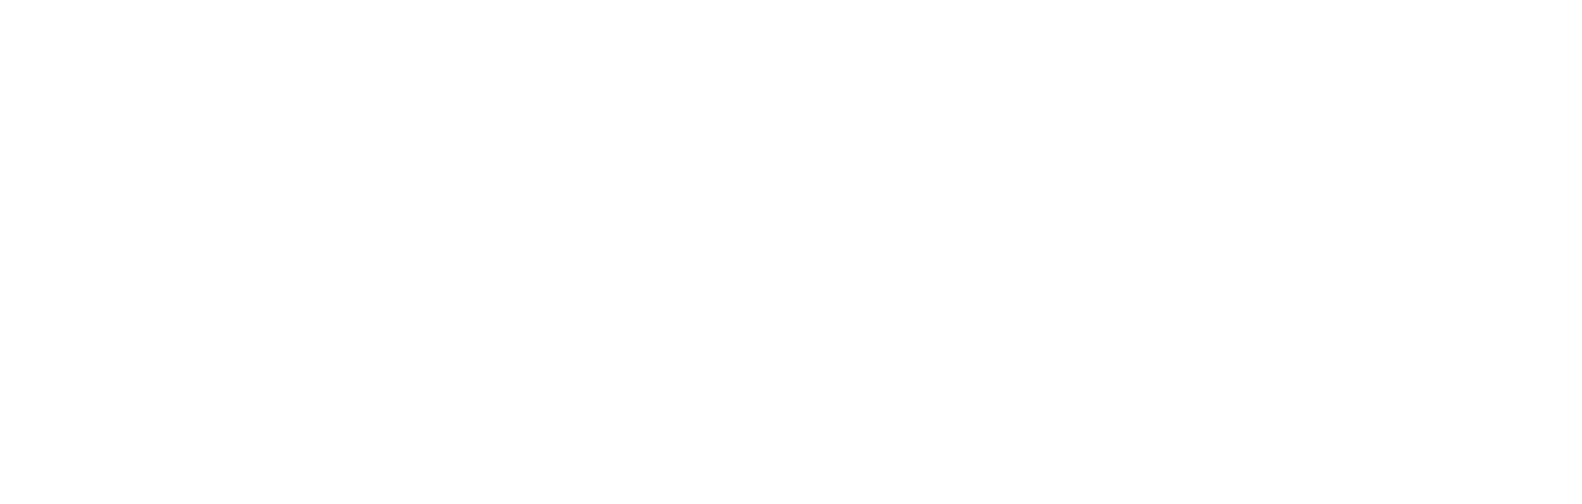 Huron Consulting logo large for dark backgrounds (transparent PNG)